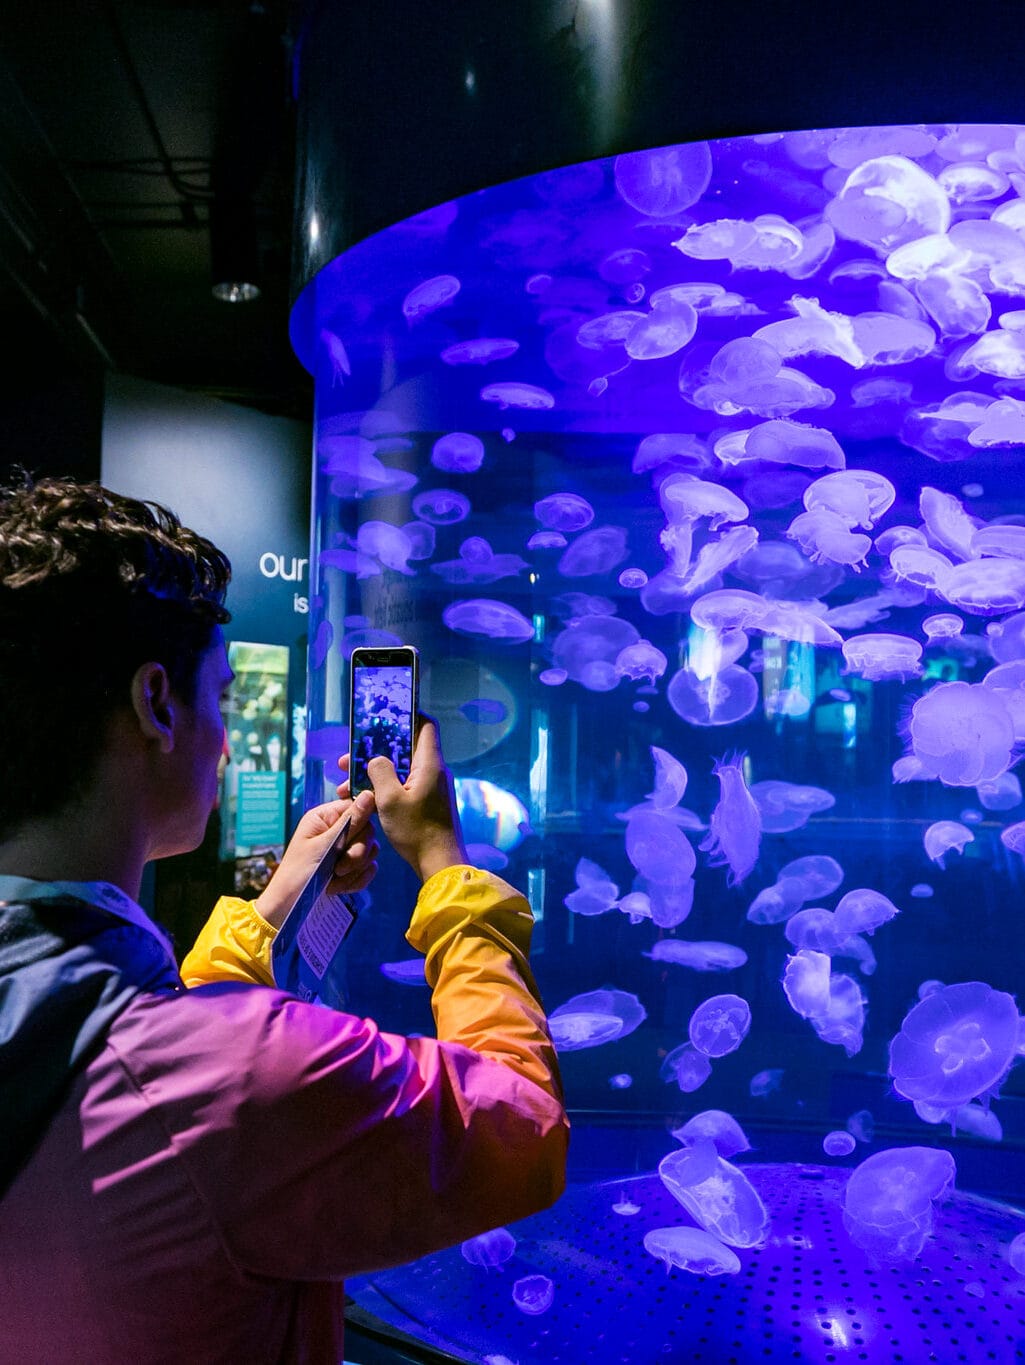 Person with short brown hair holds up their phone to take a photo of a large jelly fish tank.